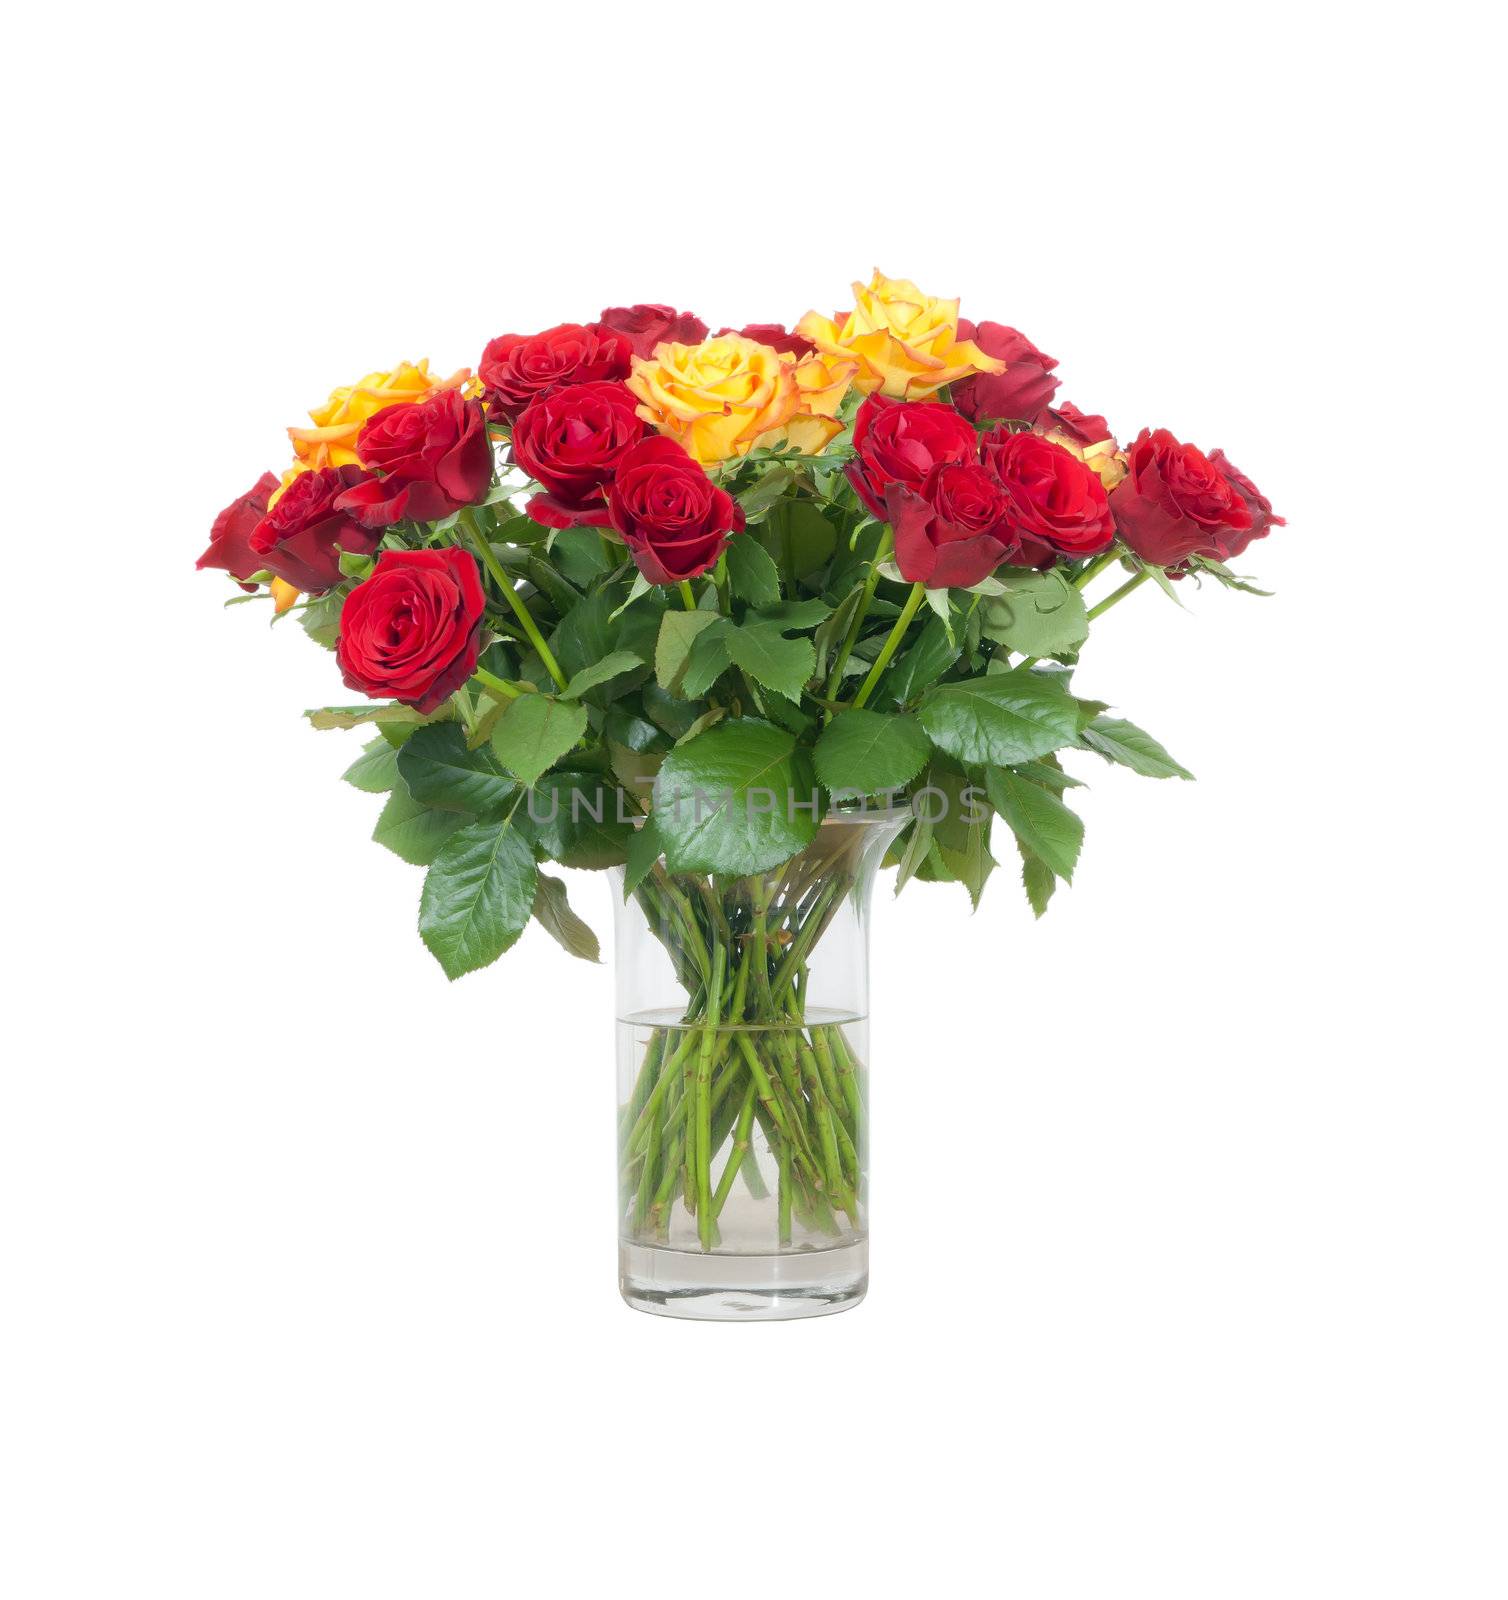 An image of a nice bouquet yellow and red roses